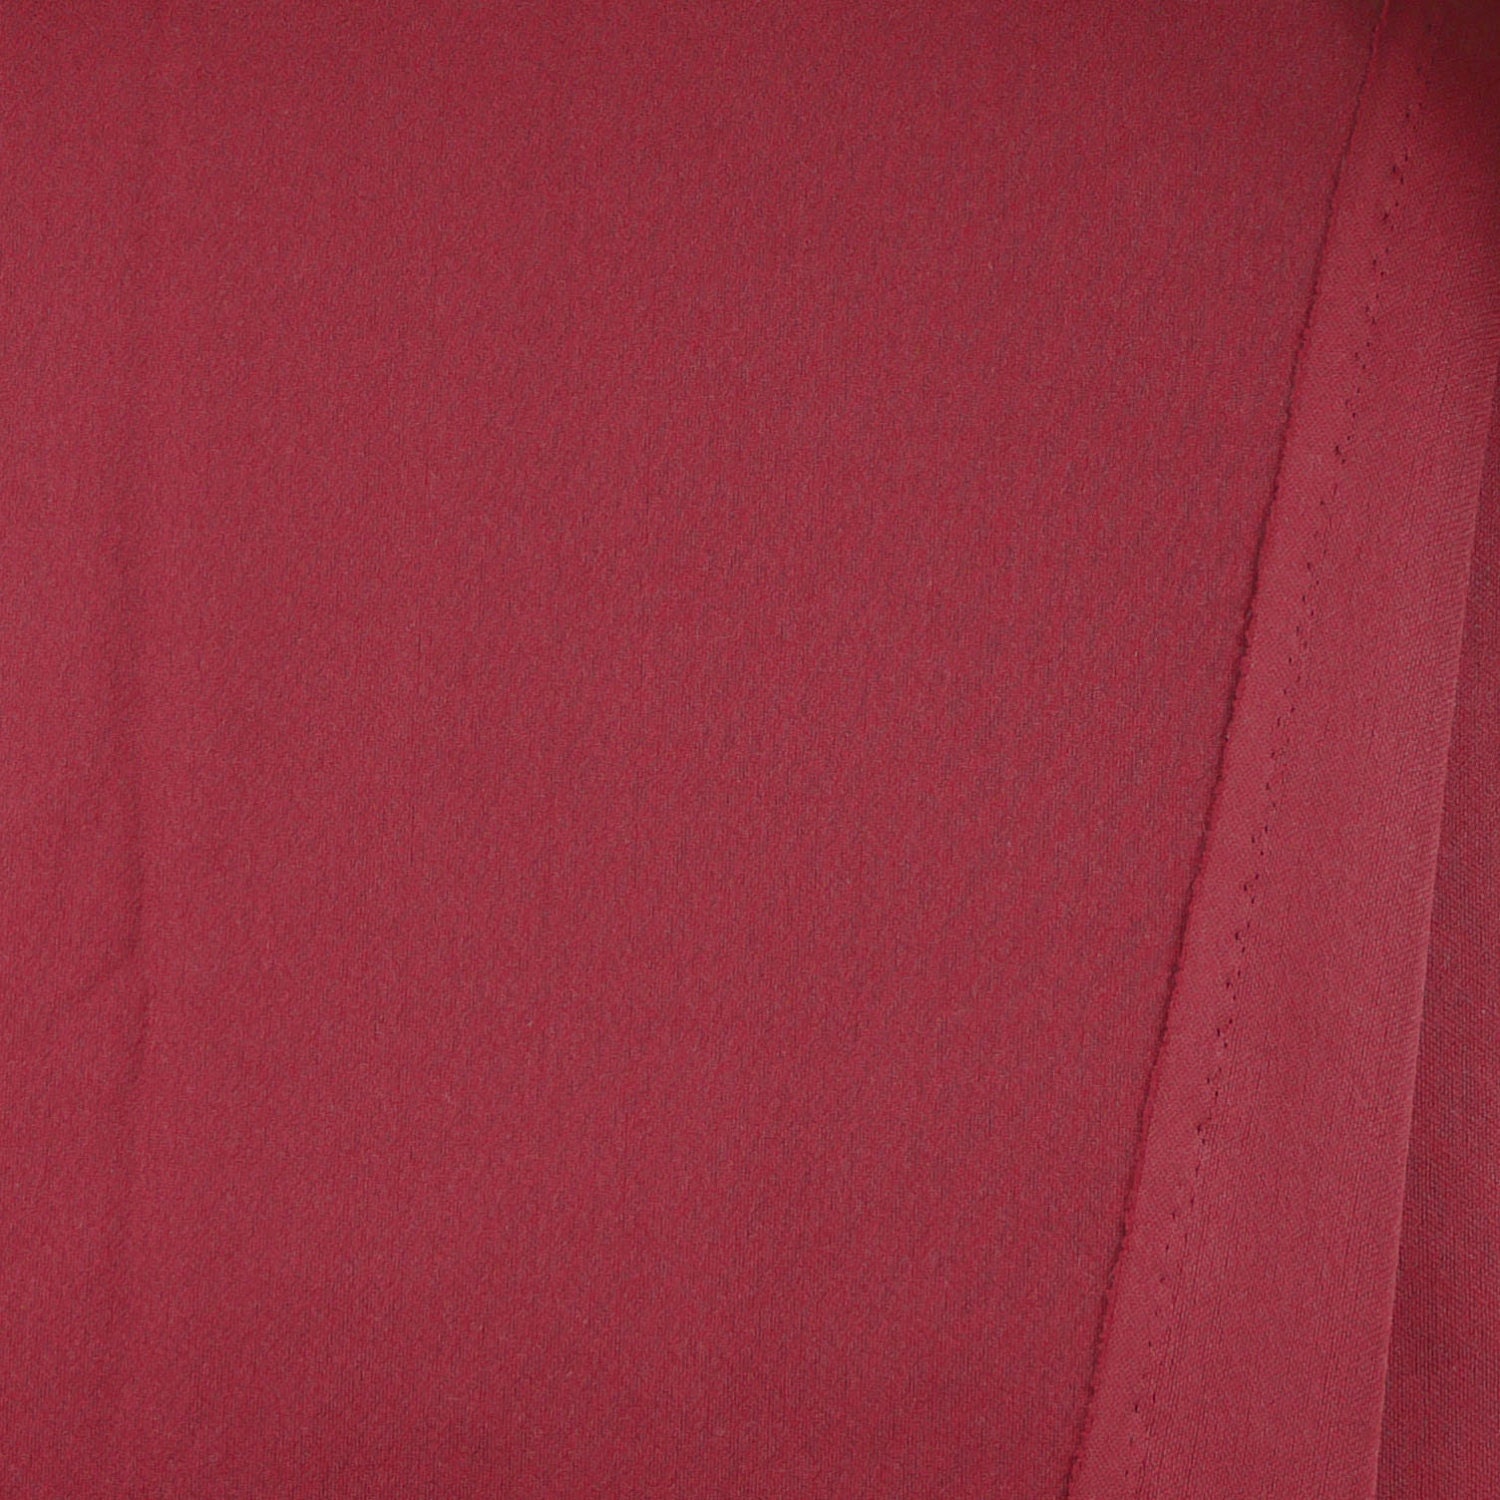 1 YARD DOUBLE KNIT Burgundy Red Wine Wide Suiting or